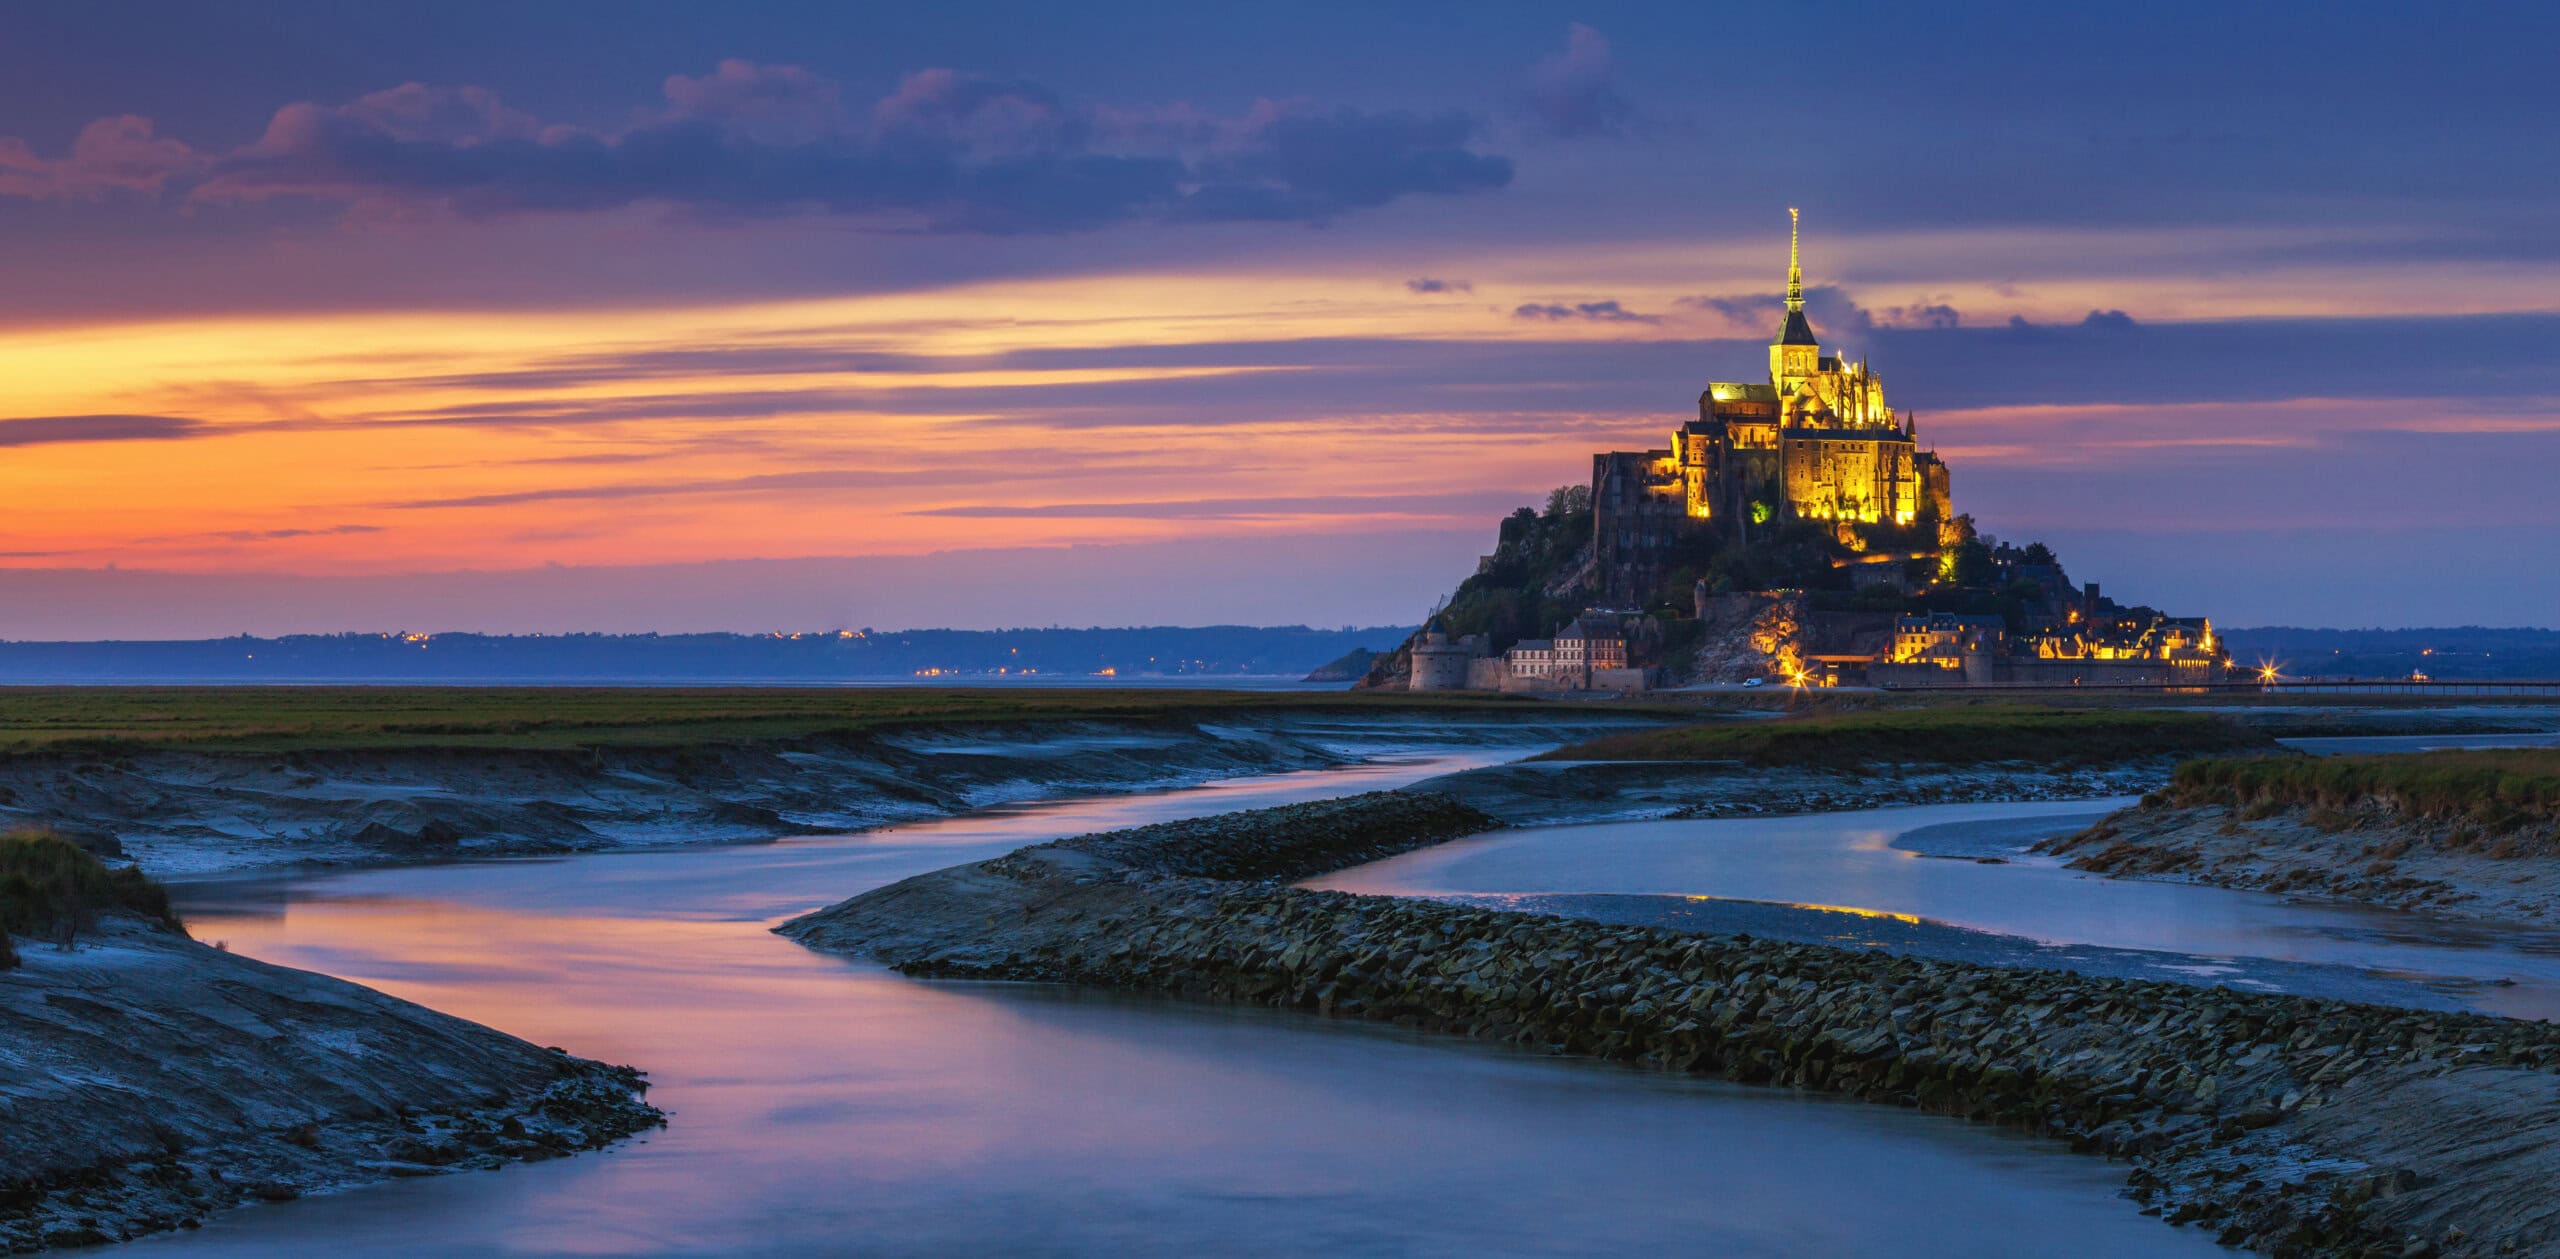 Lose the Shoes: a Low-tide Walk on the Bay of Mt. St. Michel